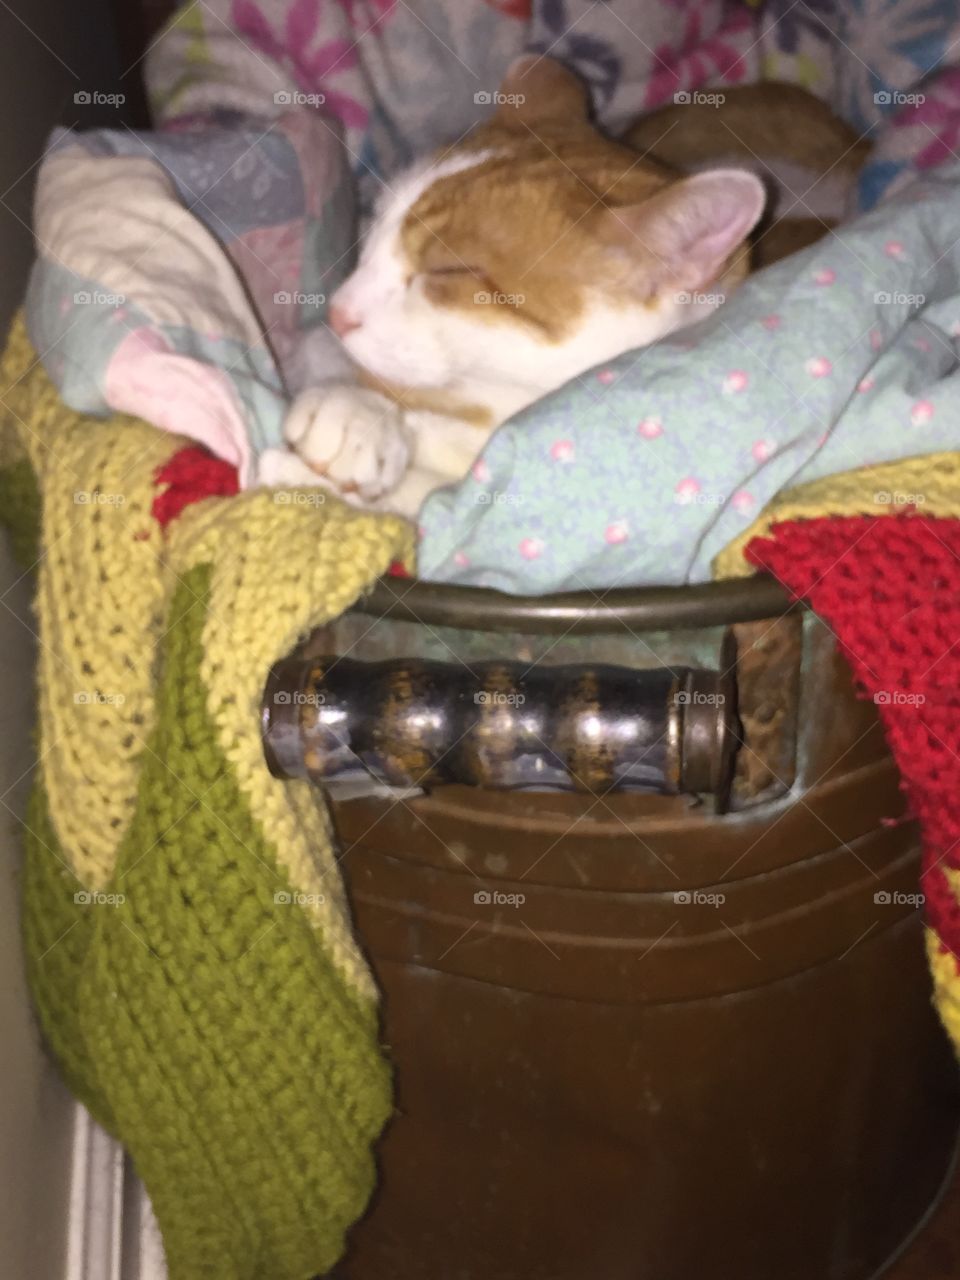 Cat in an old fashioned tub. Cat in a tub on a quilt 